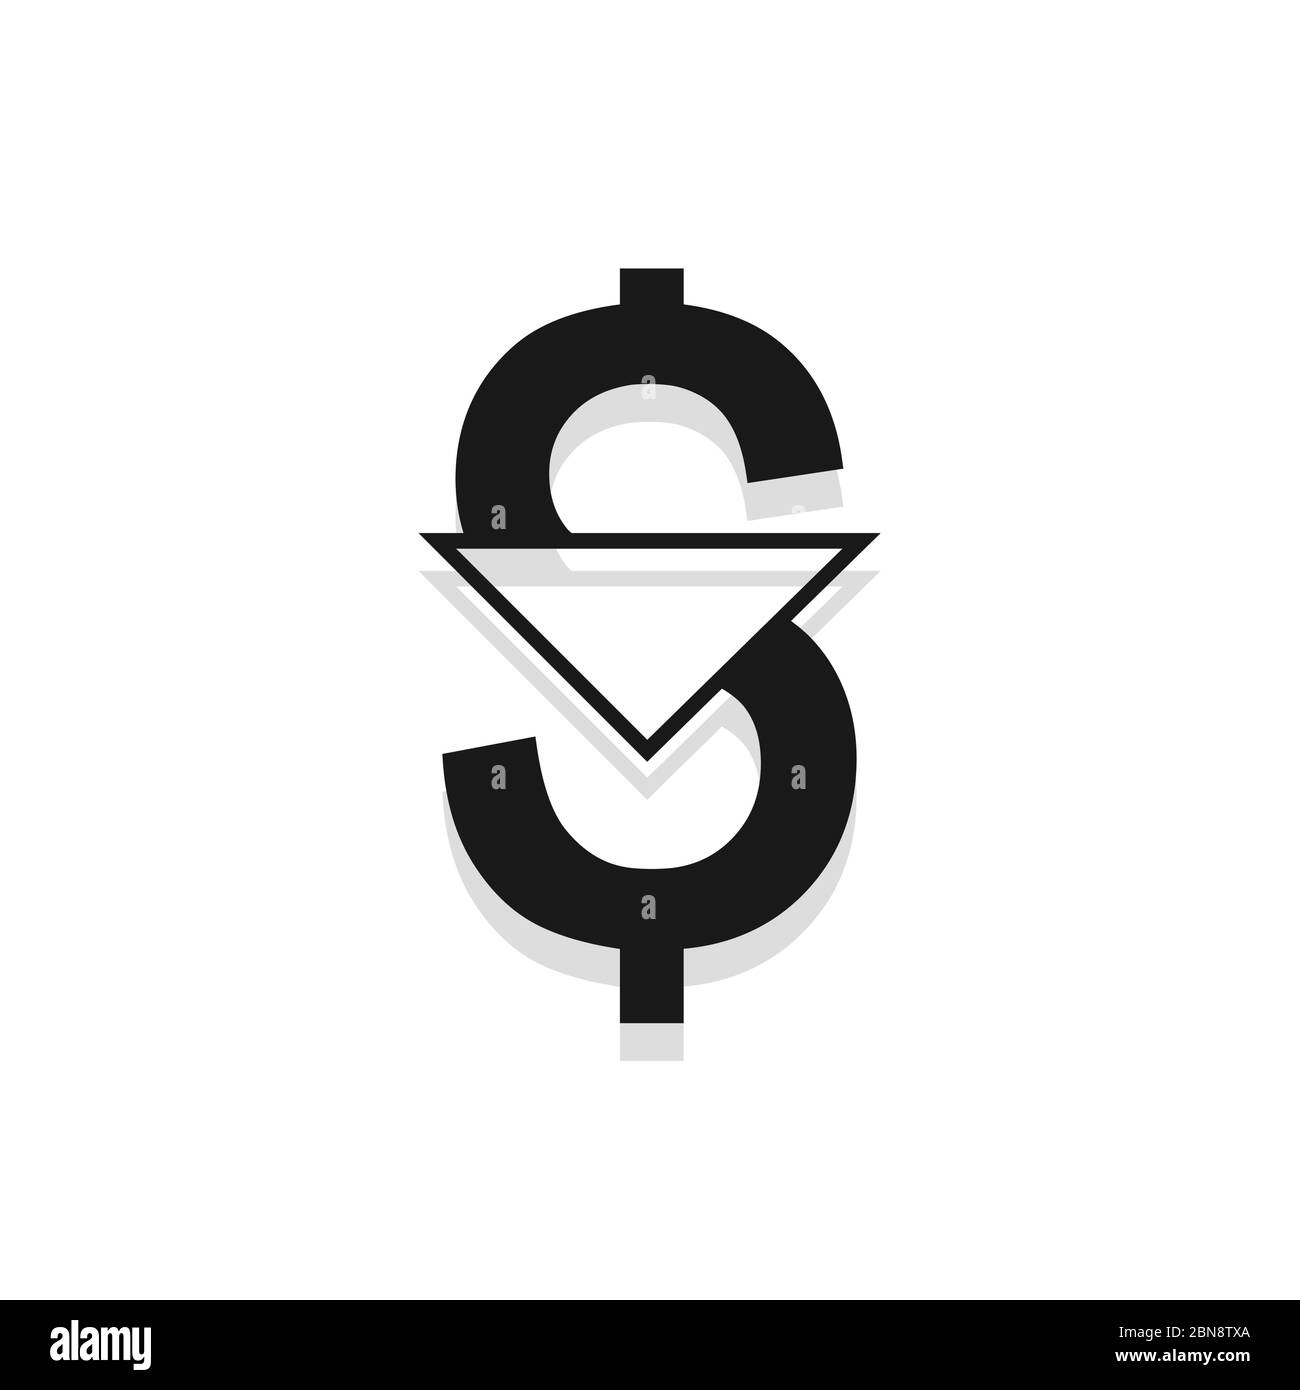 Dollar down icon. Cost reduction sign. Money symbol with arrow stretching rising drop fall down. Decrease dollar, fall, vector illustration. Stock Vector